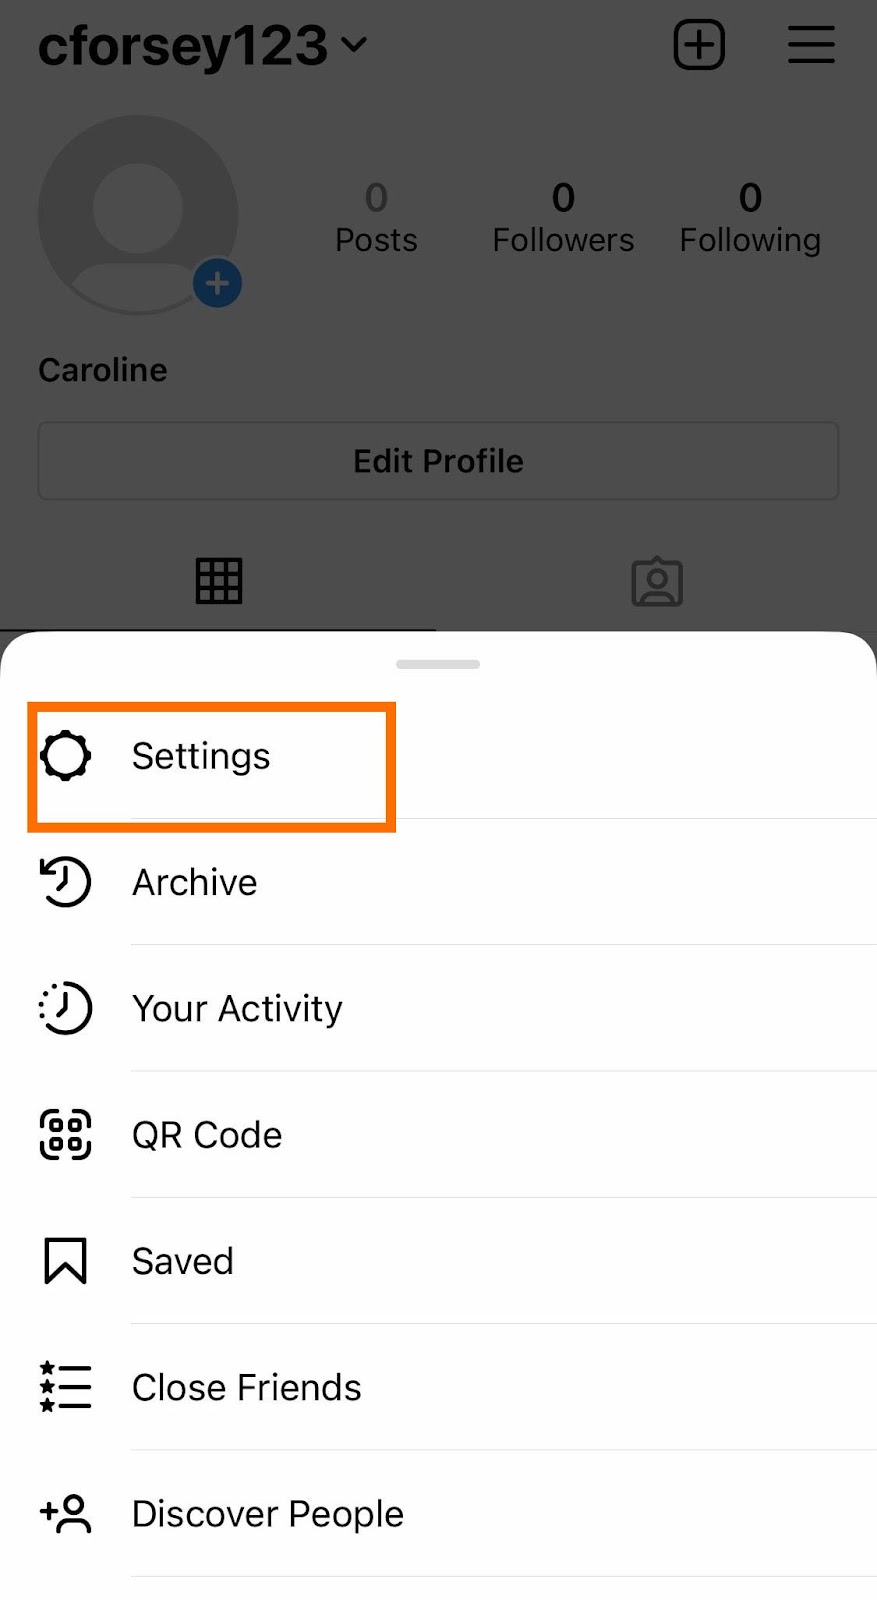 Click on Settings in the slide-up navigation bar that appears on the Instagram app